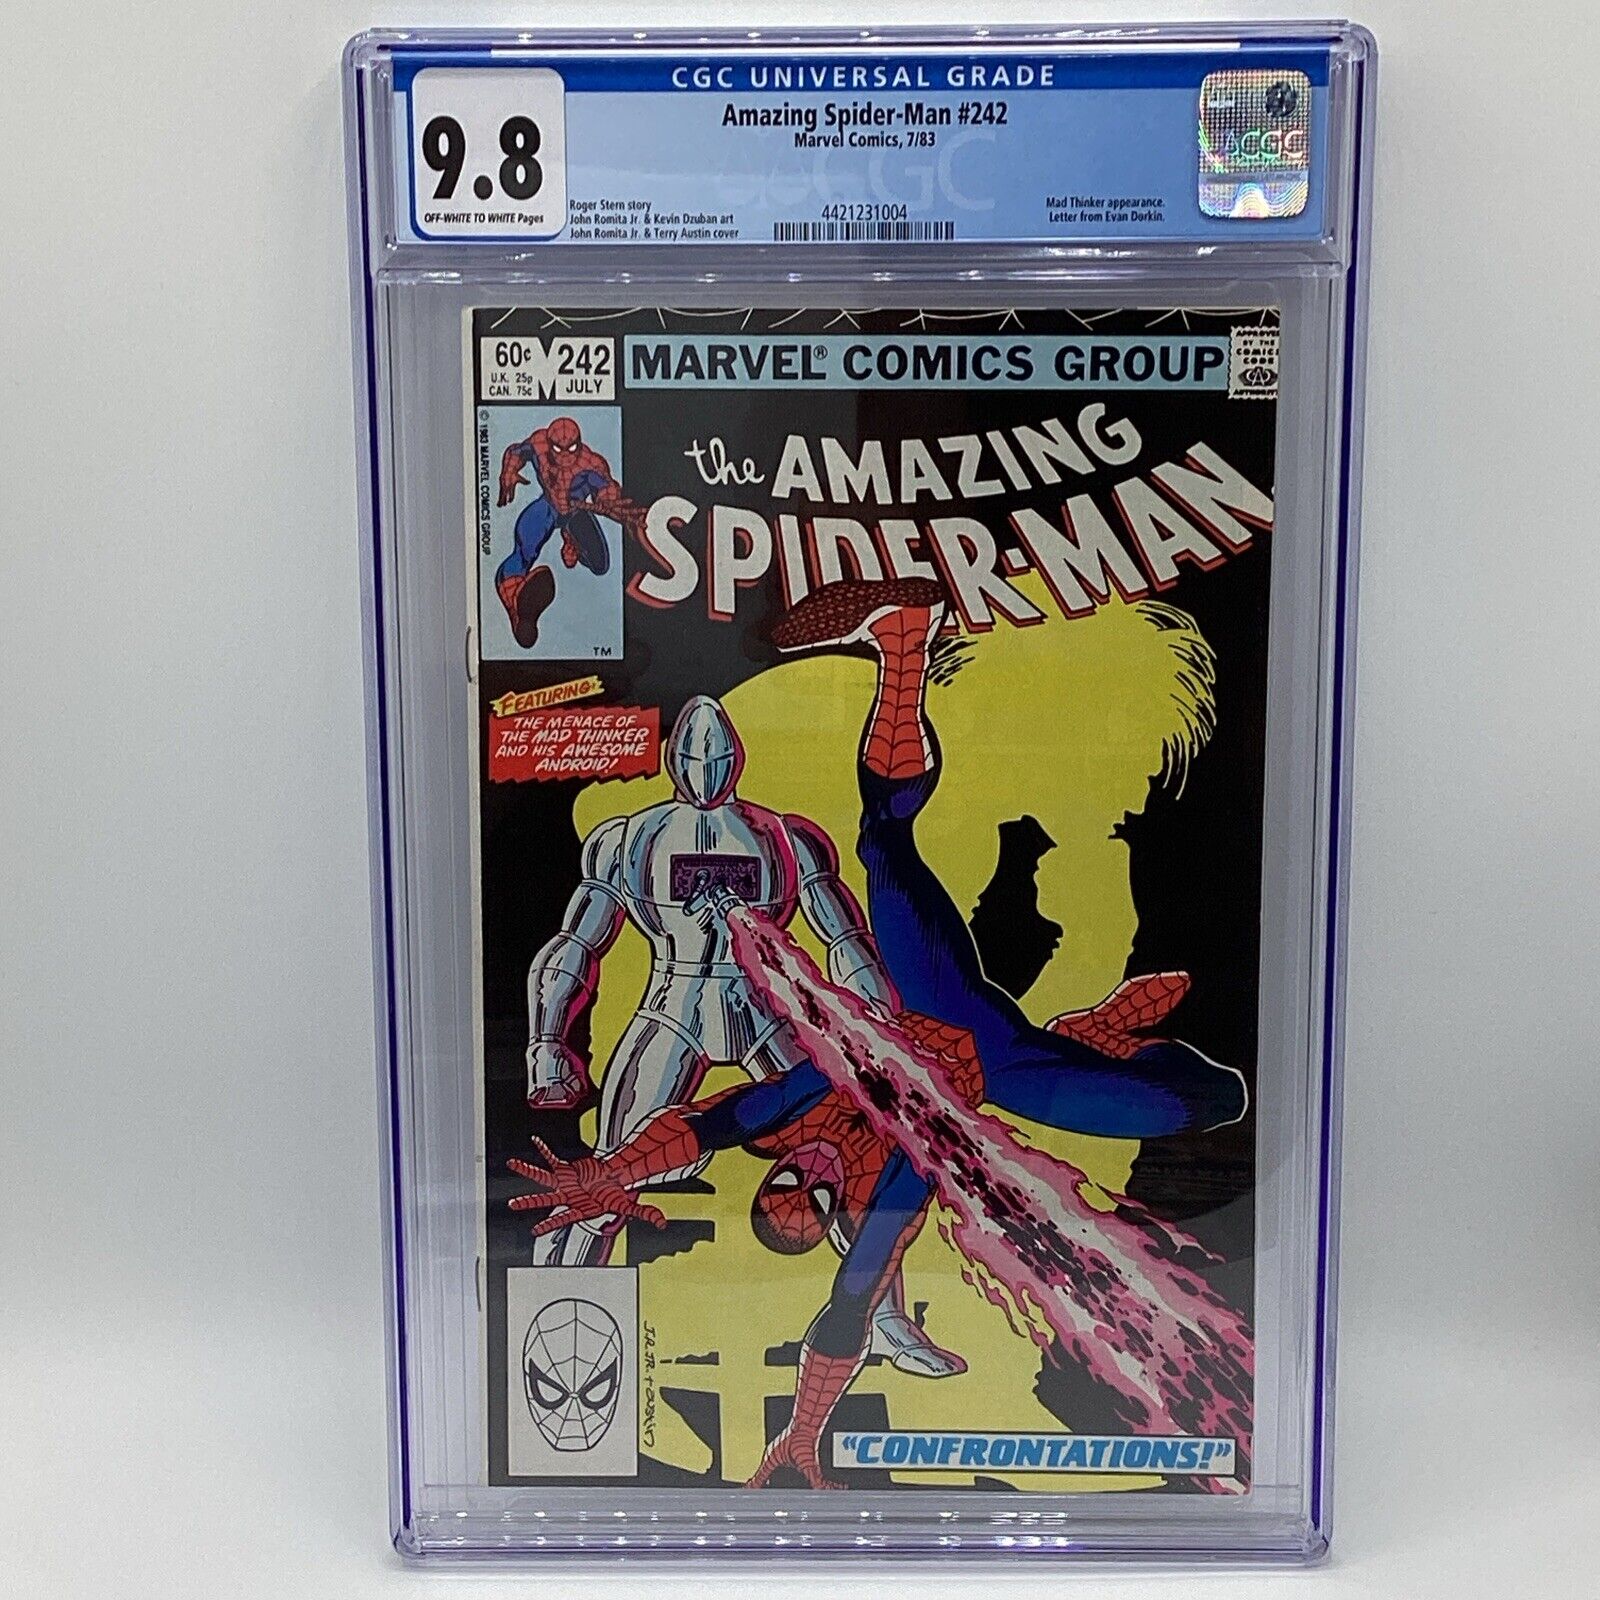 July 1990 Marvel Amazing Spider-Man Issue #242 ‘Confrontations’ CGC Graded 9.8